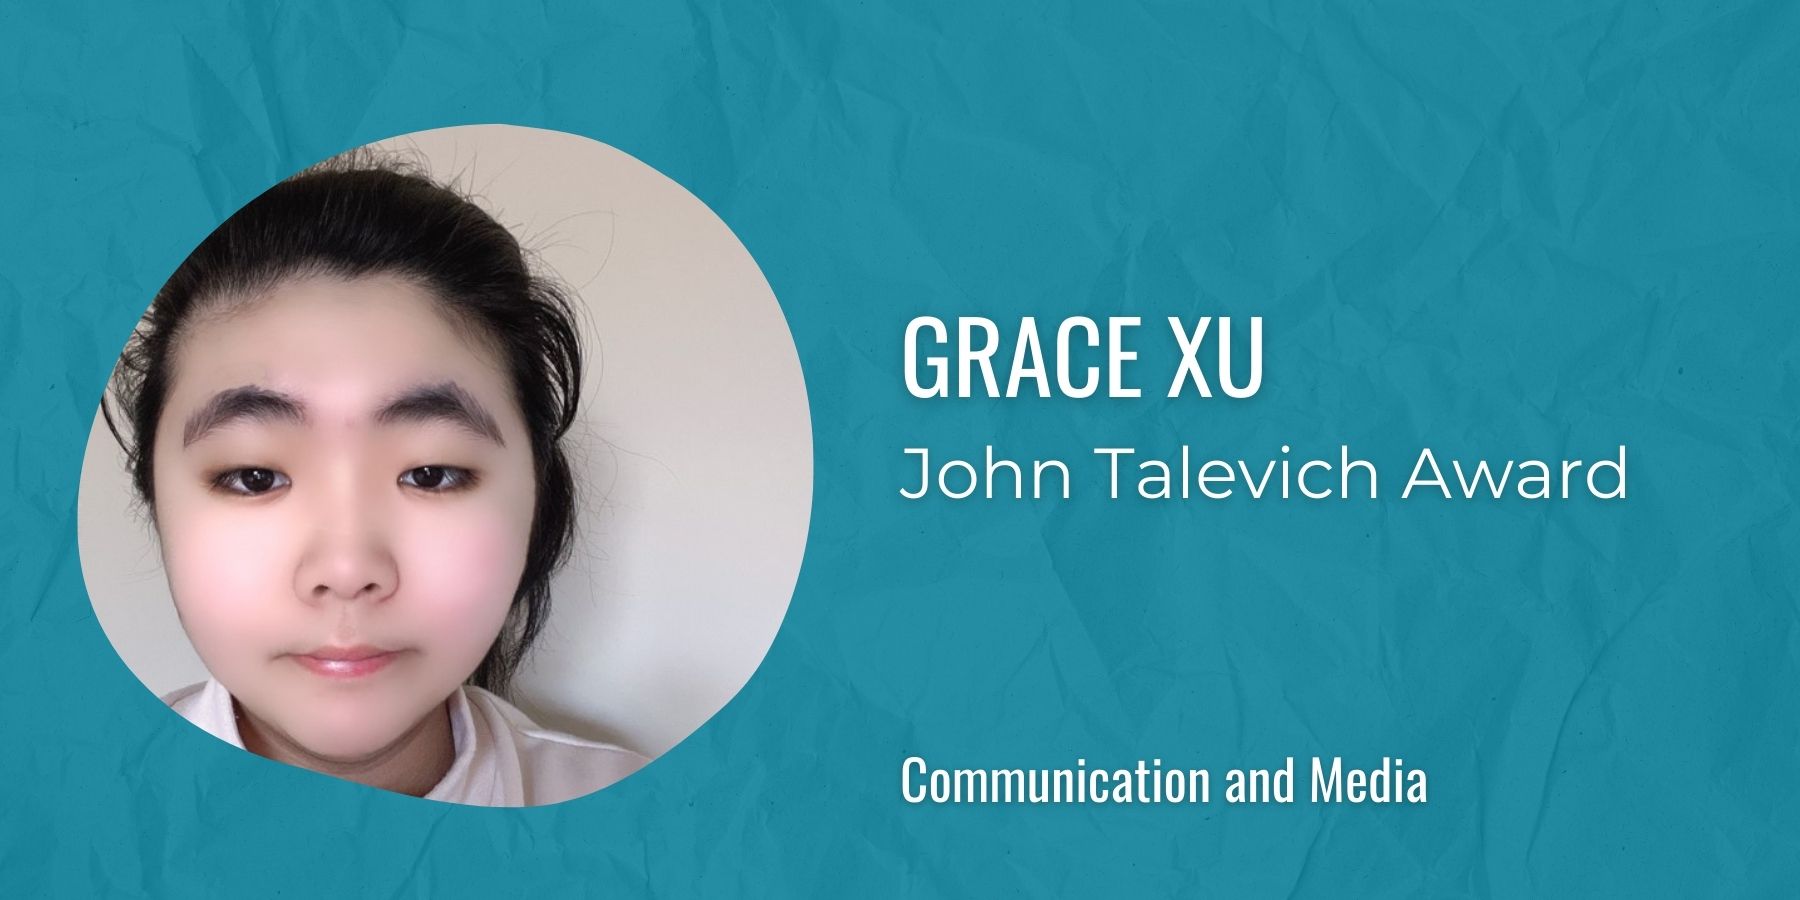 Image of Grace Xu with text: John Talevich Award, Communication and Media
